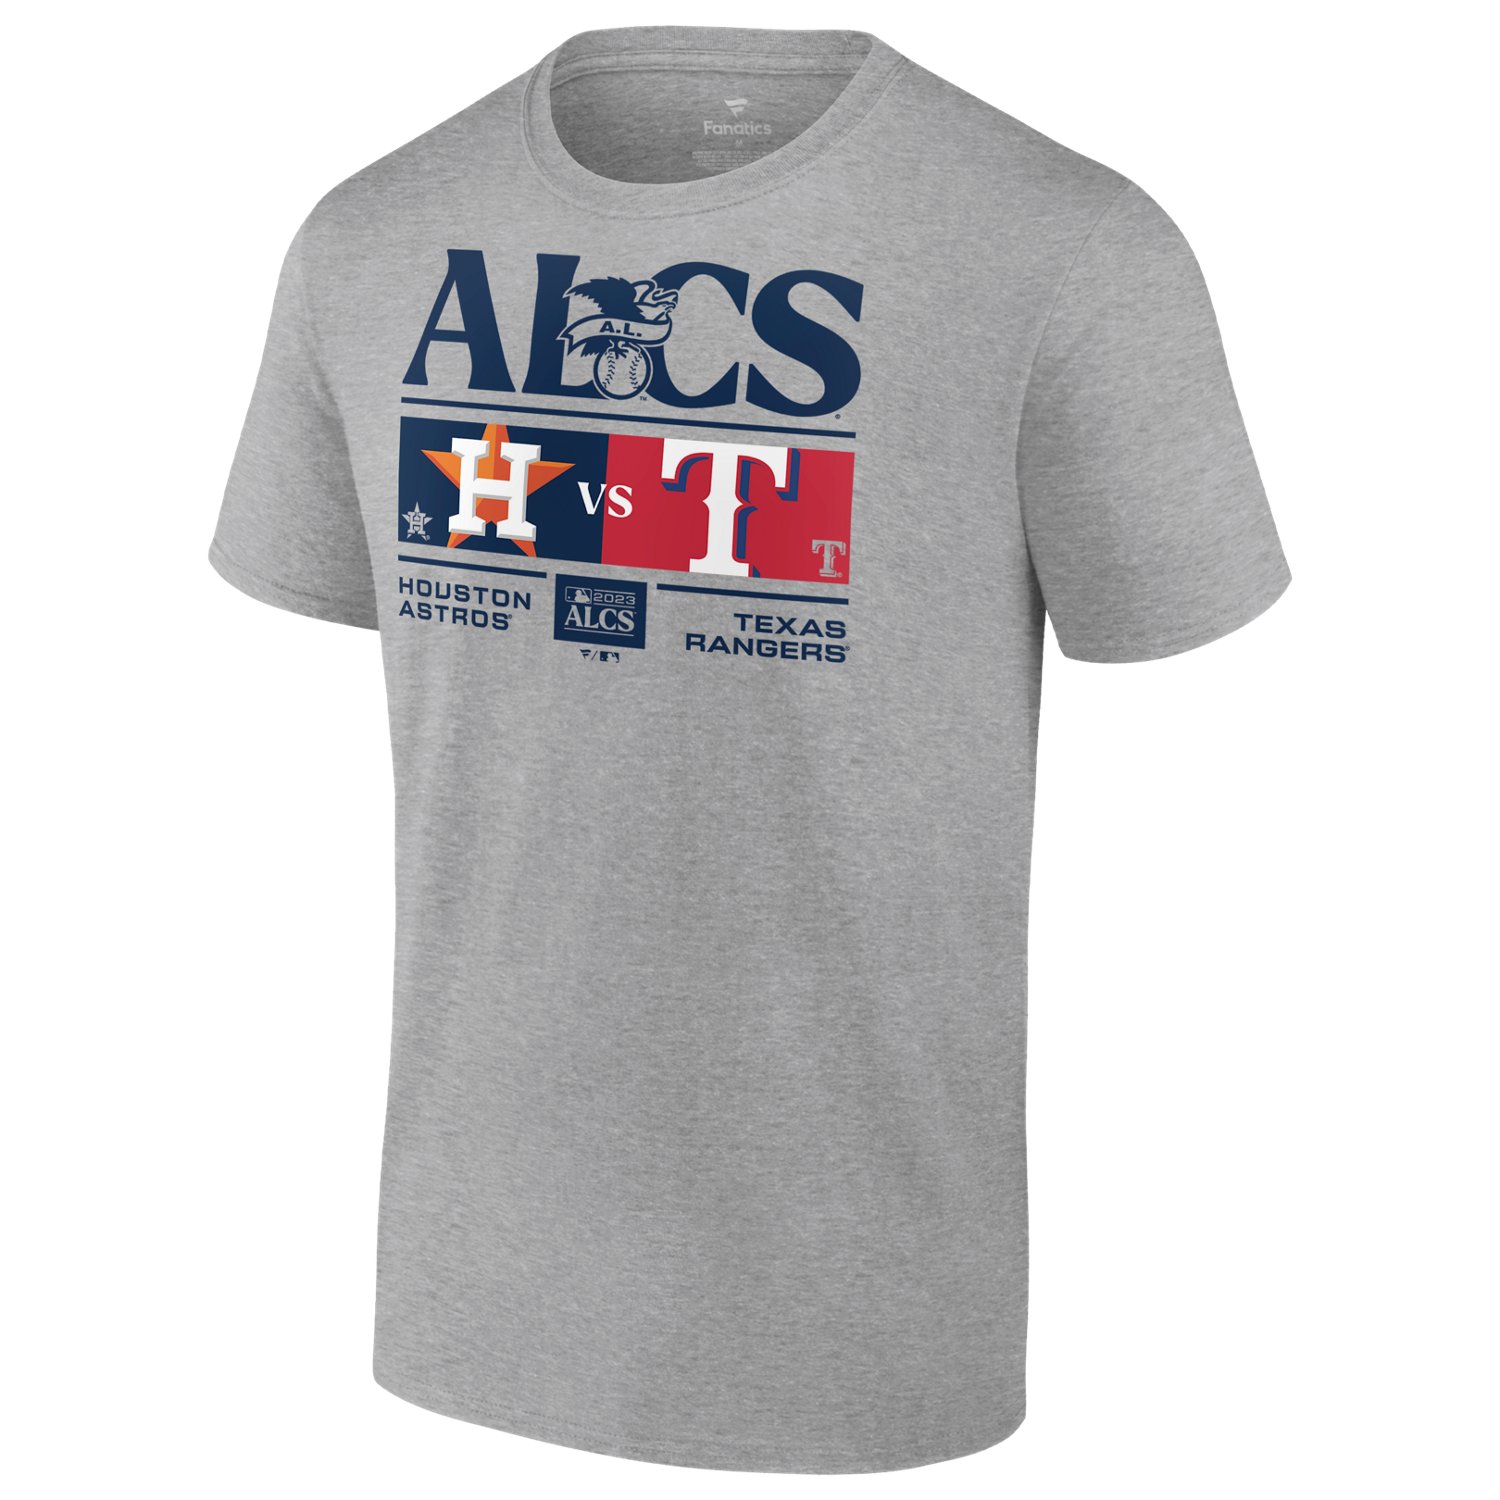 New Astros gear at Academy Sports